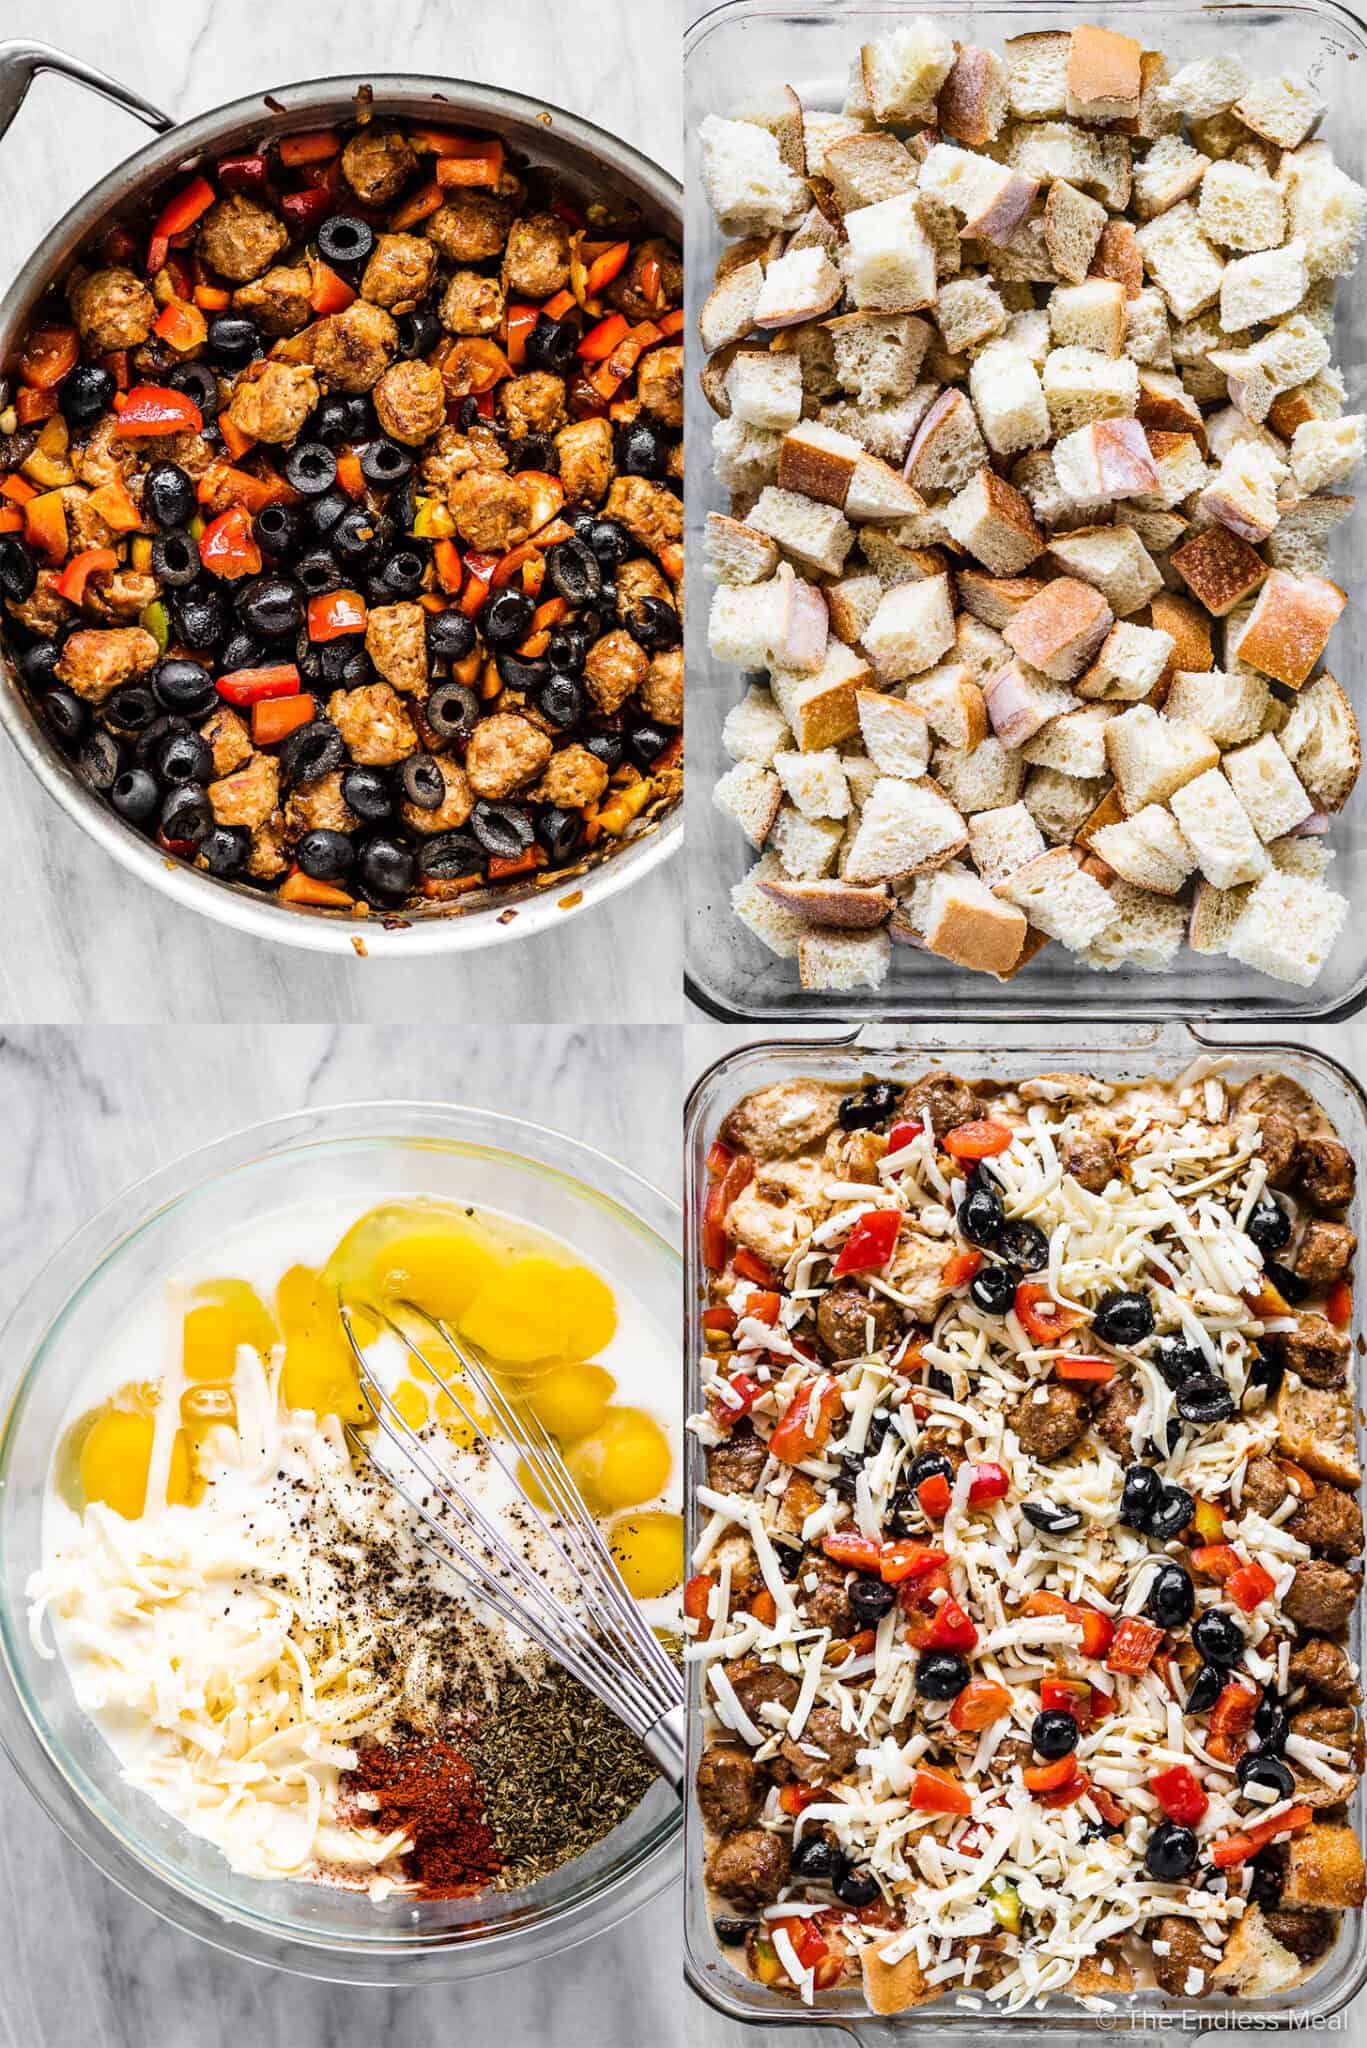 4 pictures showing the steps to make a breakfast strata.